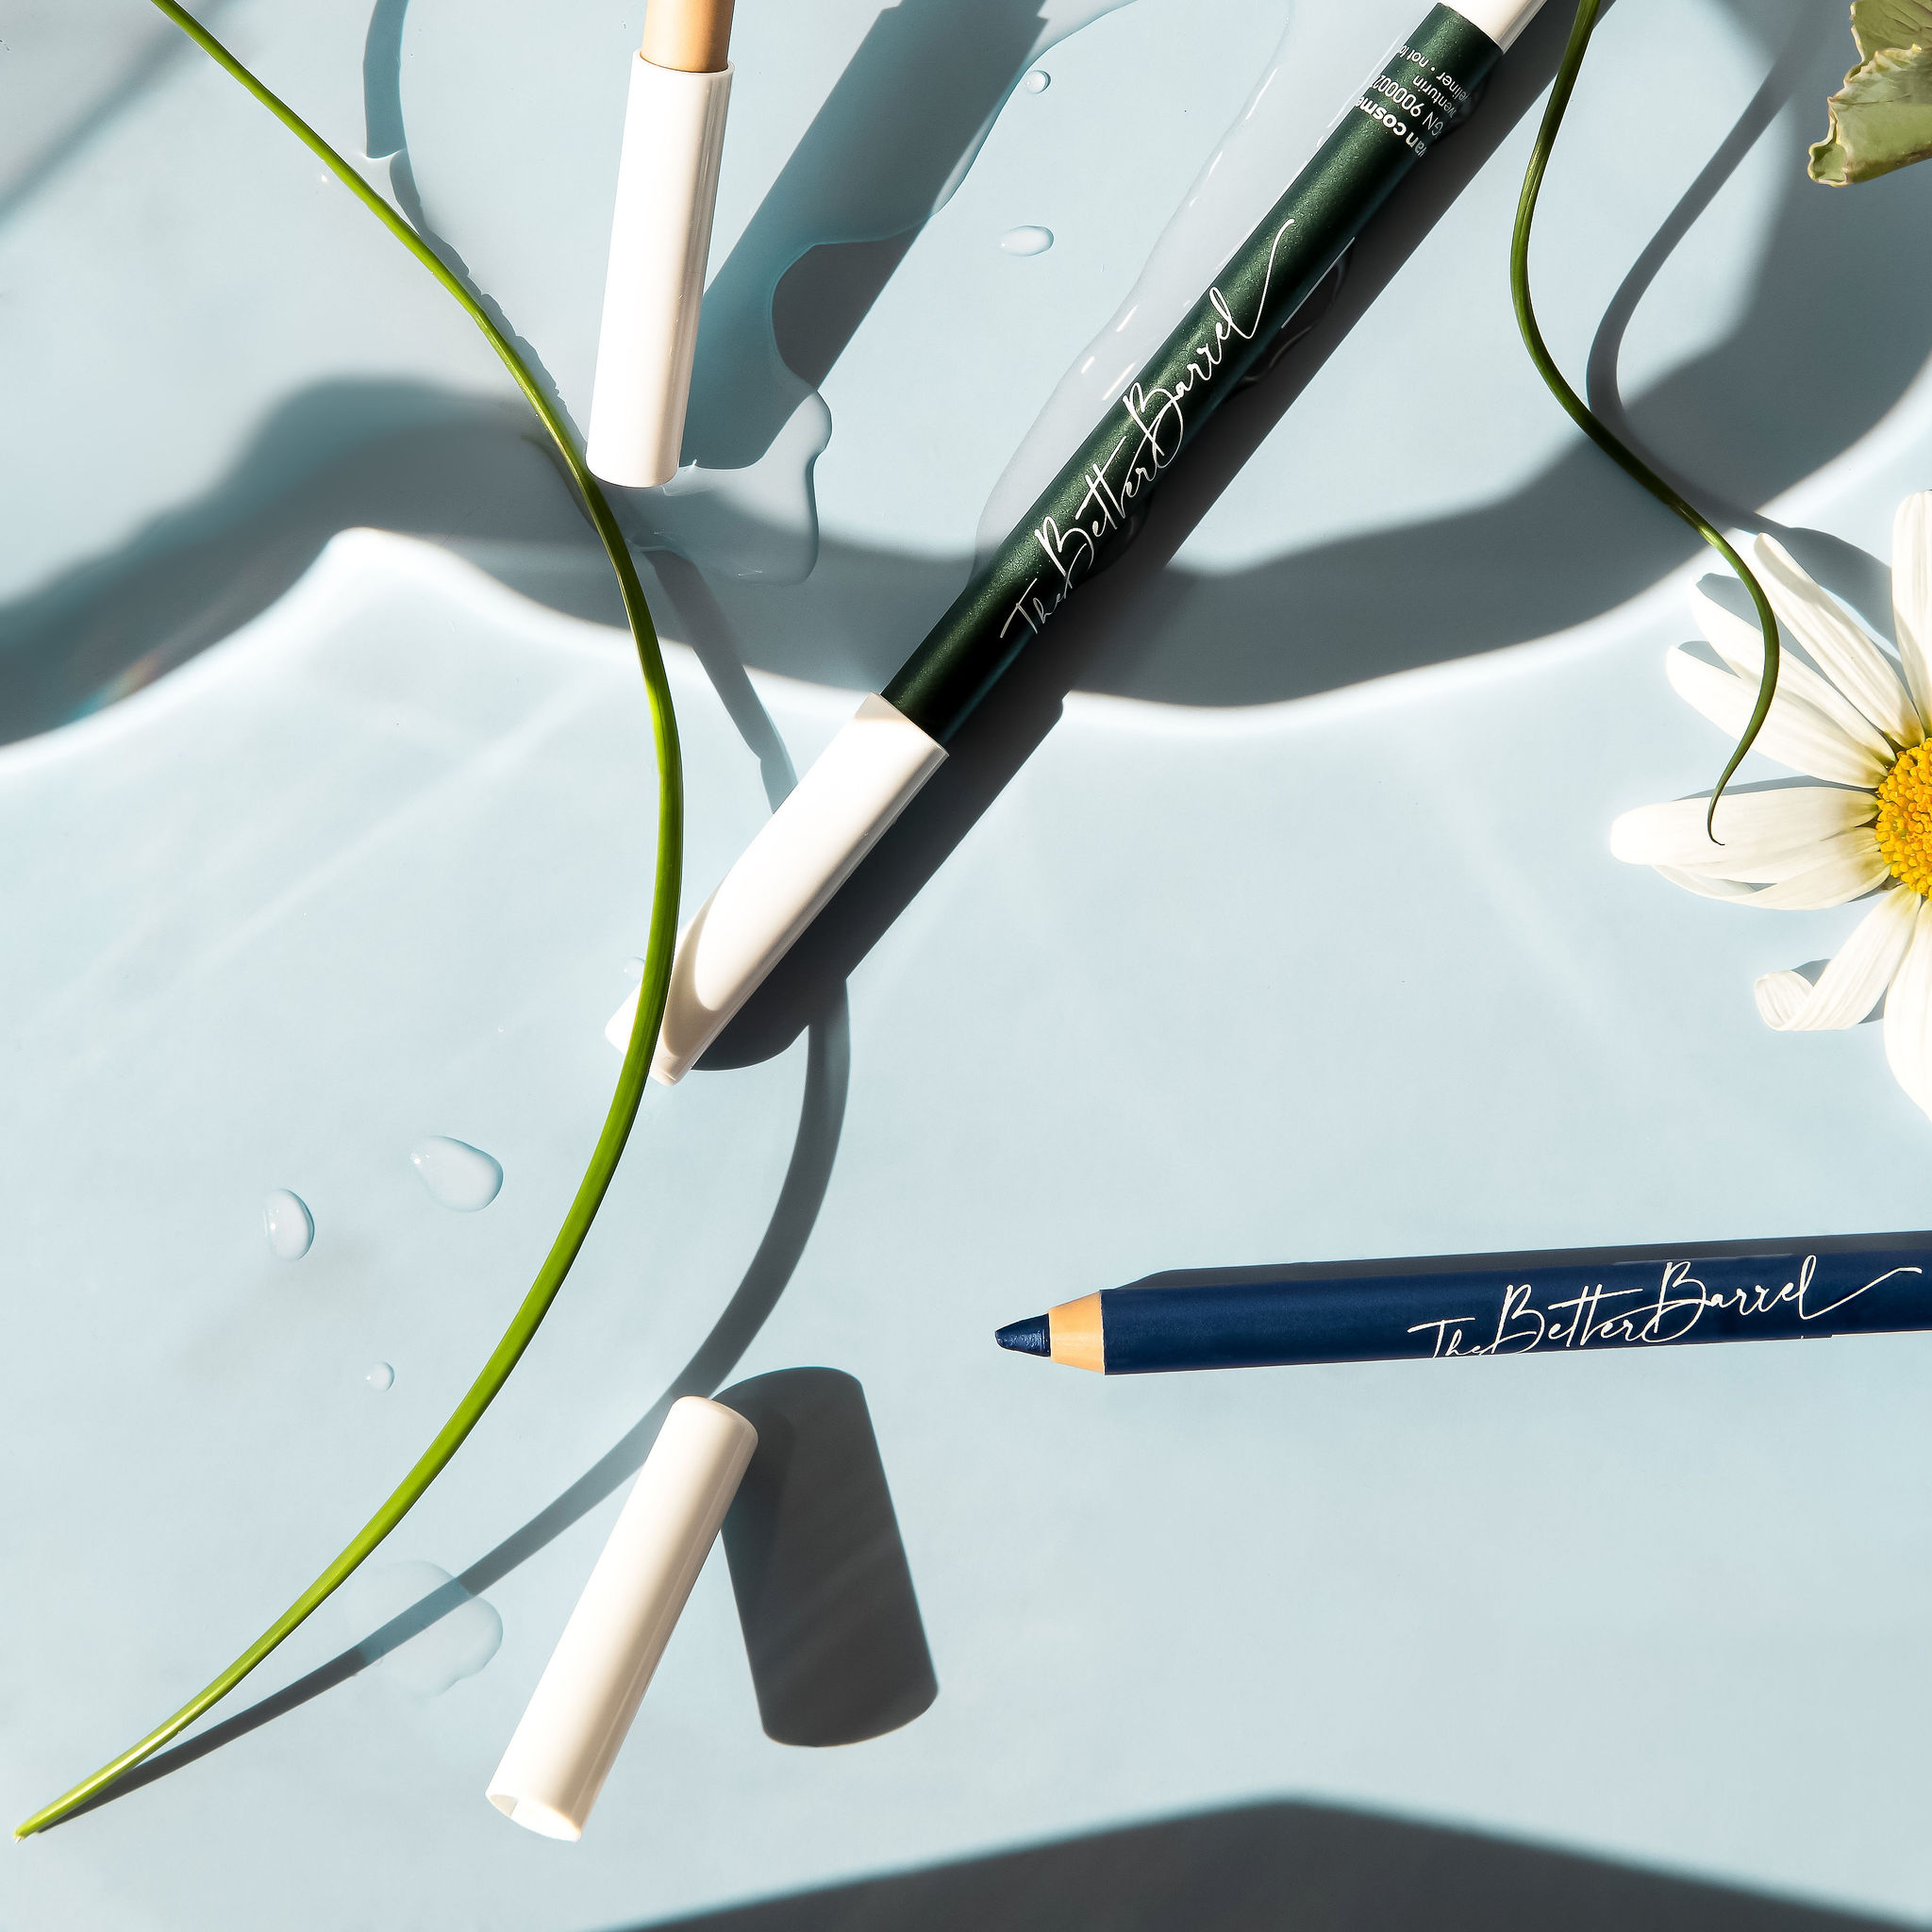 Schwan Cosmetics’s color cosmetic pencils made with sustainable Sulapac materials, ‘TheBetterBarrel’.